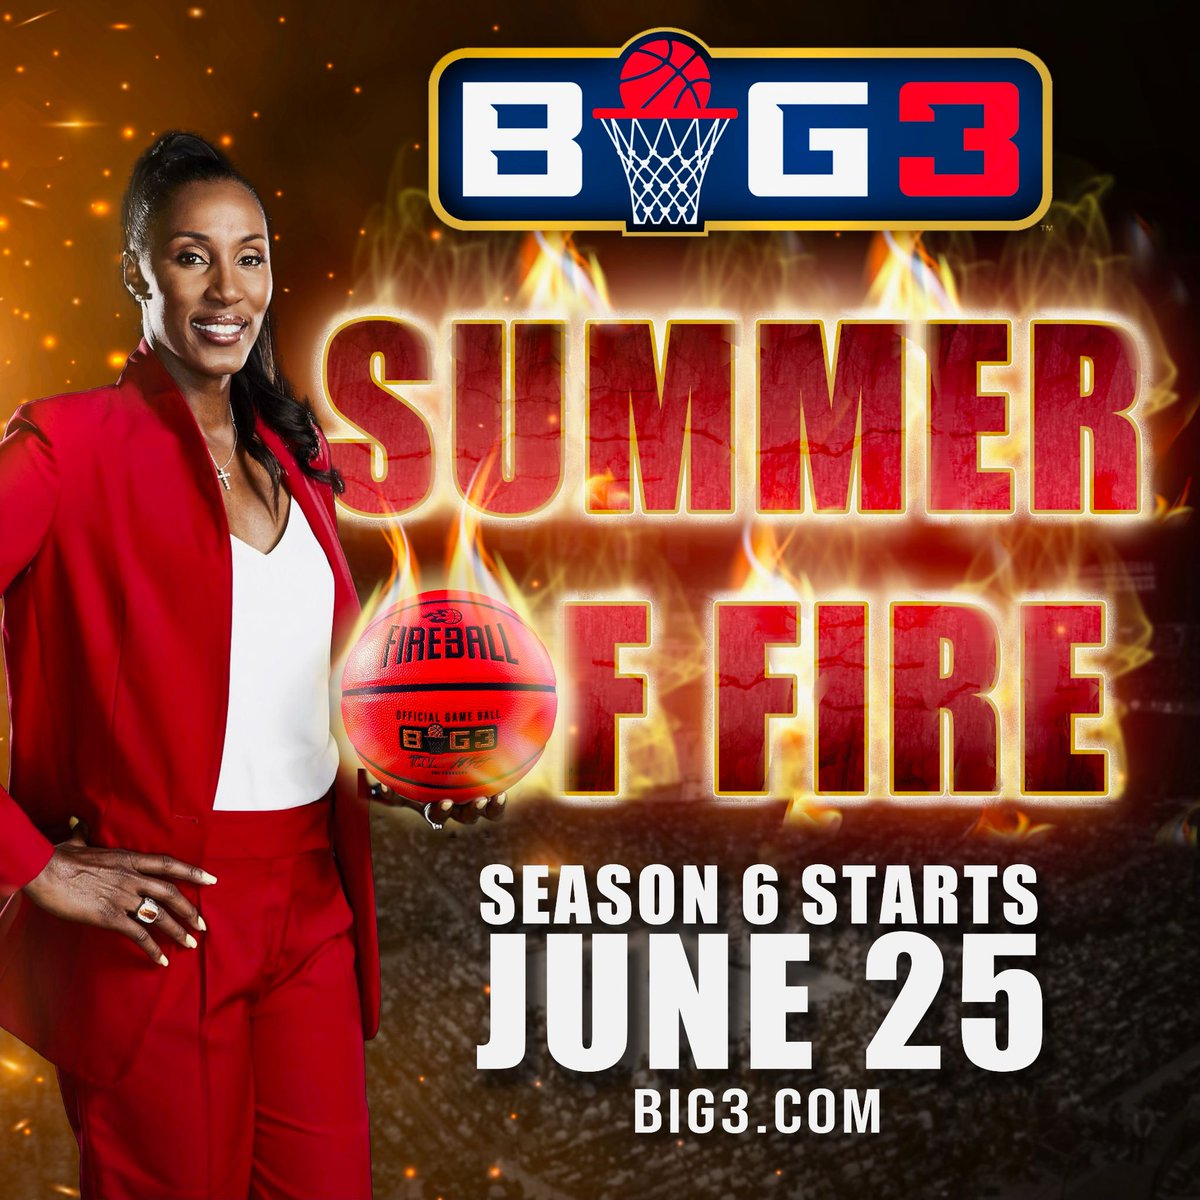 Cancel your plans, and catch us live in Chicago or on @CBS today at 1 pm ET. Season 6 is coming in hot. #SummerofFire @TheBig3